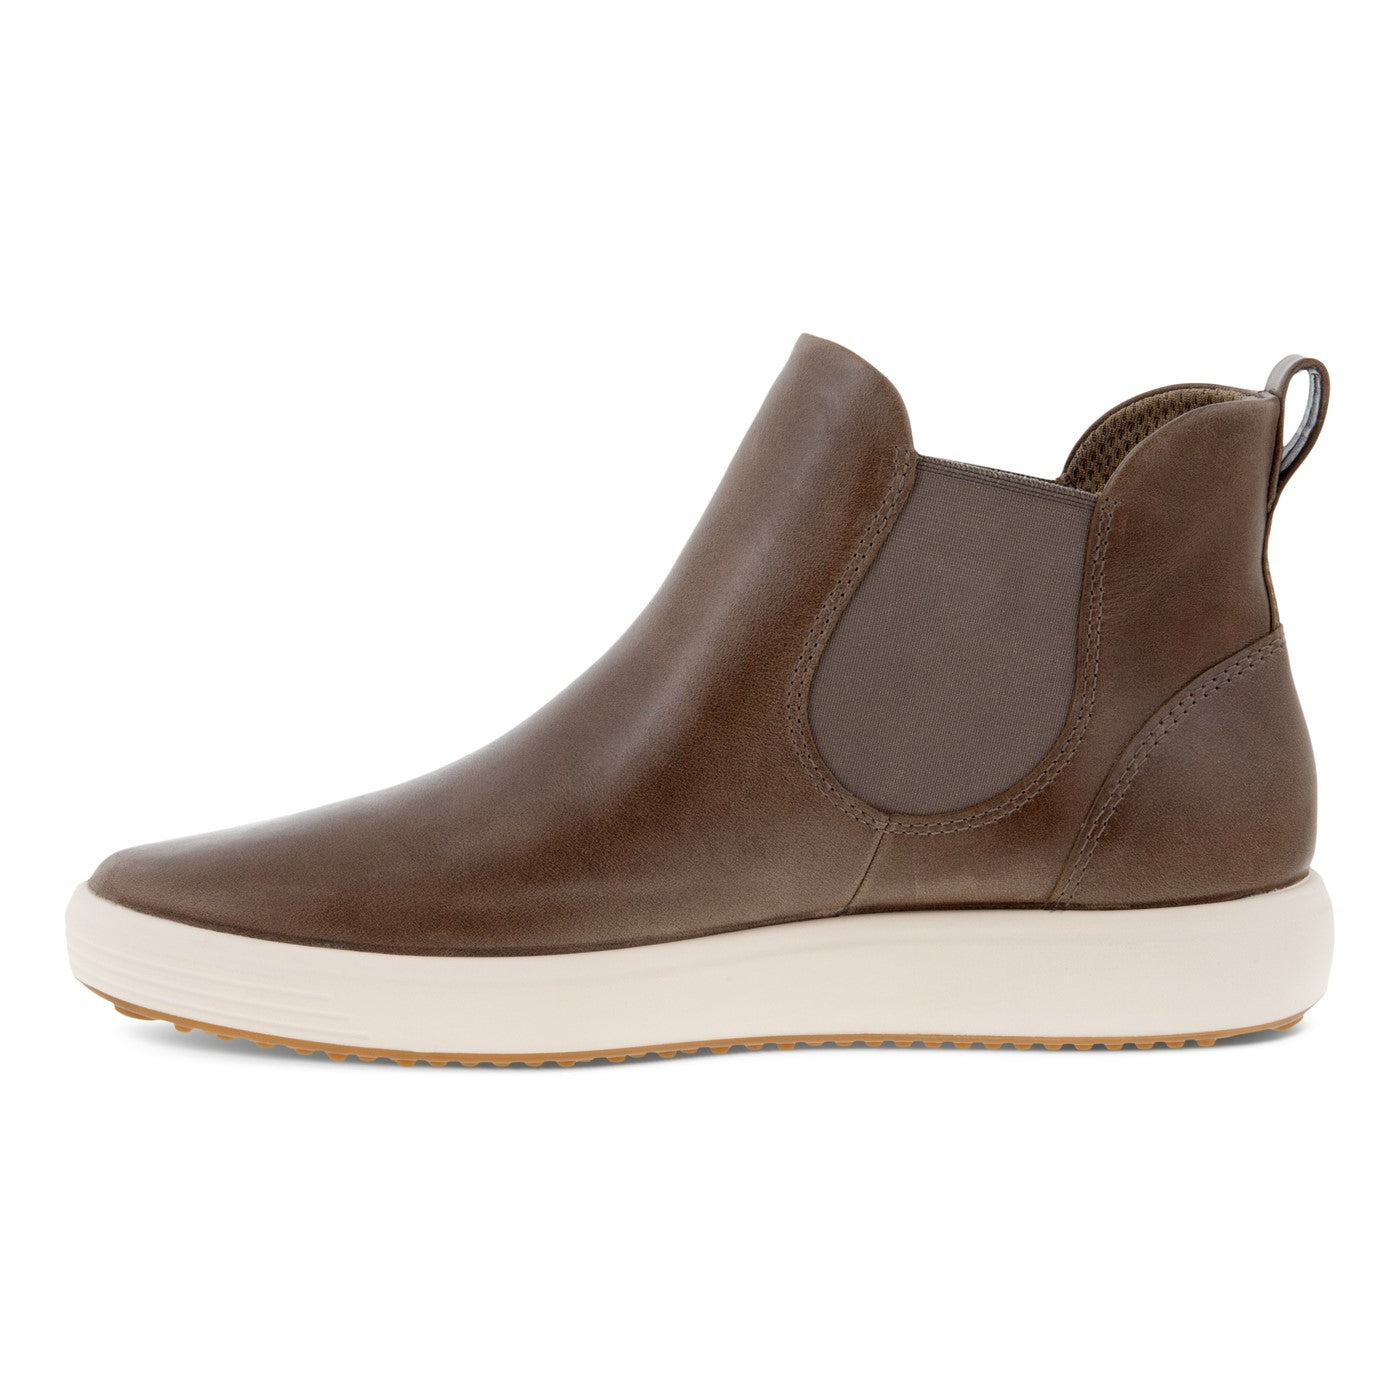 ECCO Women's SOFT 7 Chelsea Boot - Taupe Palermo